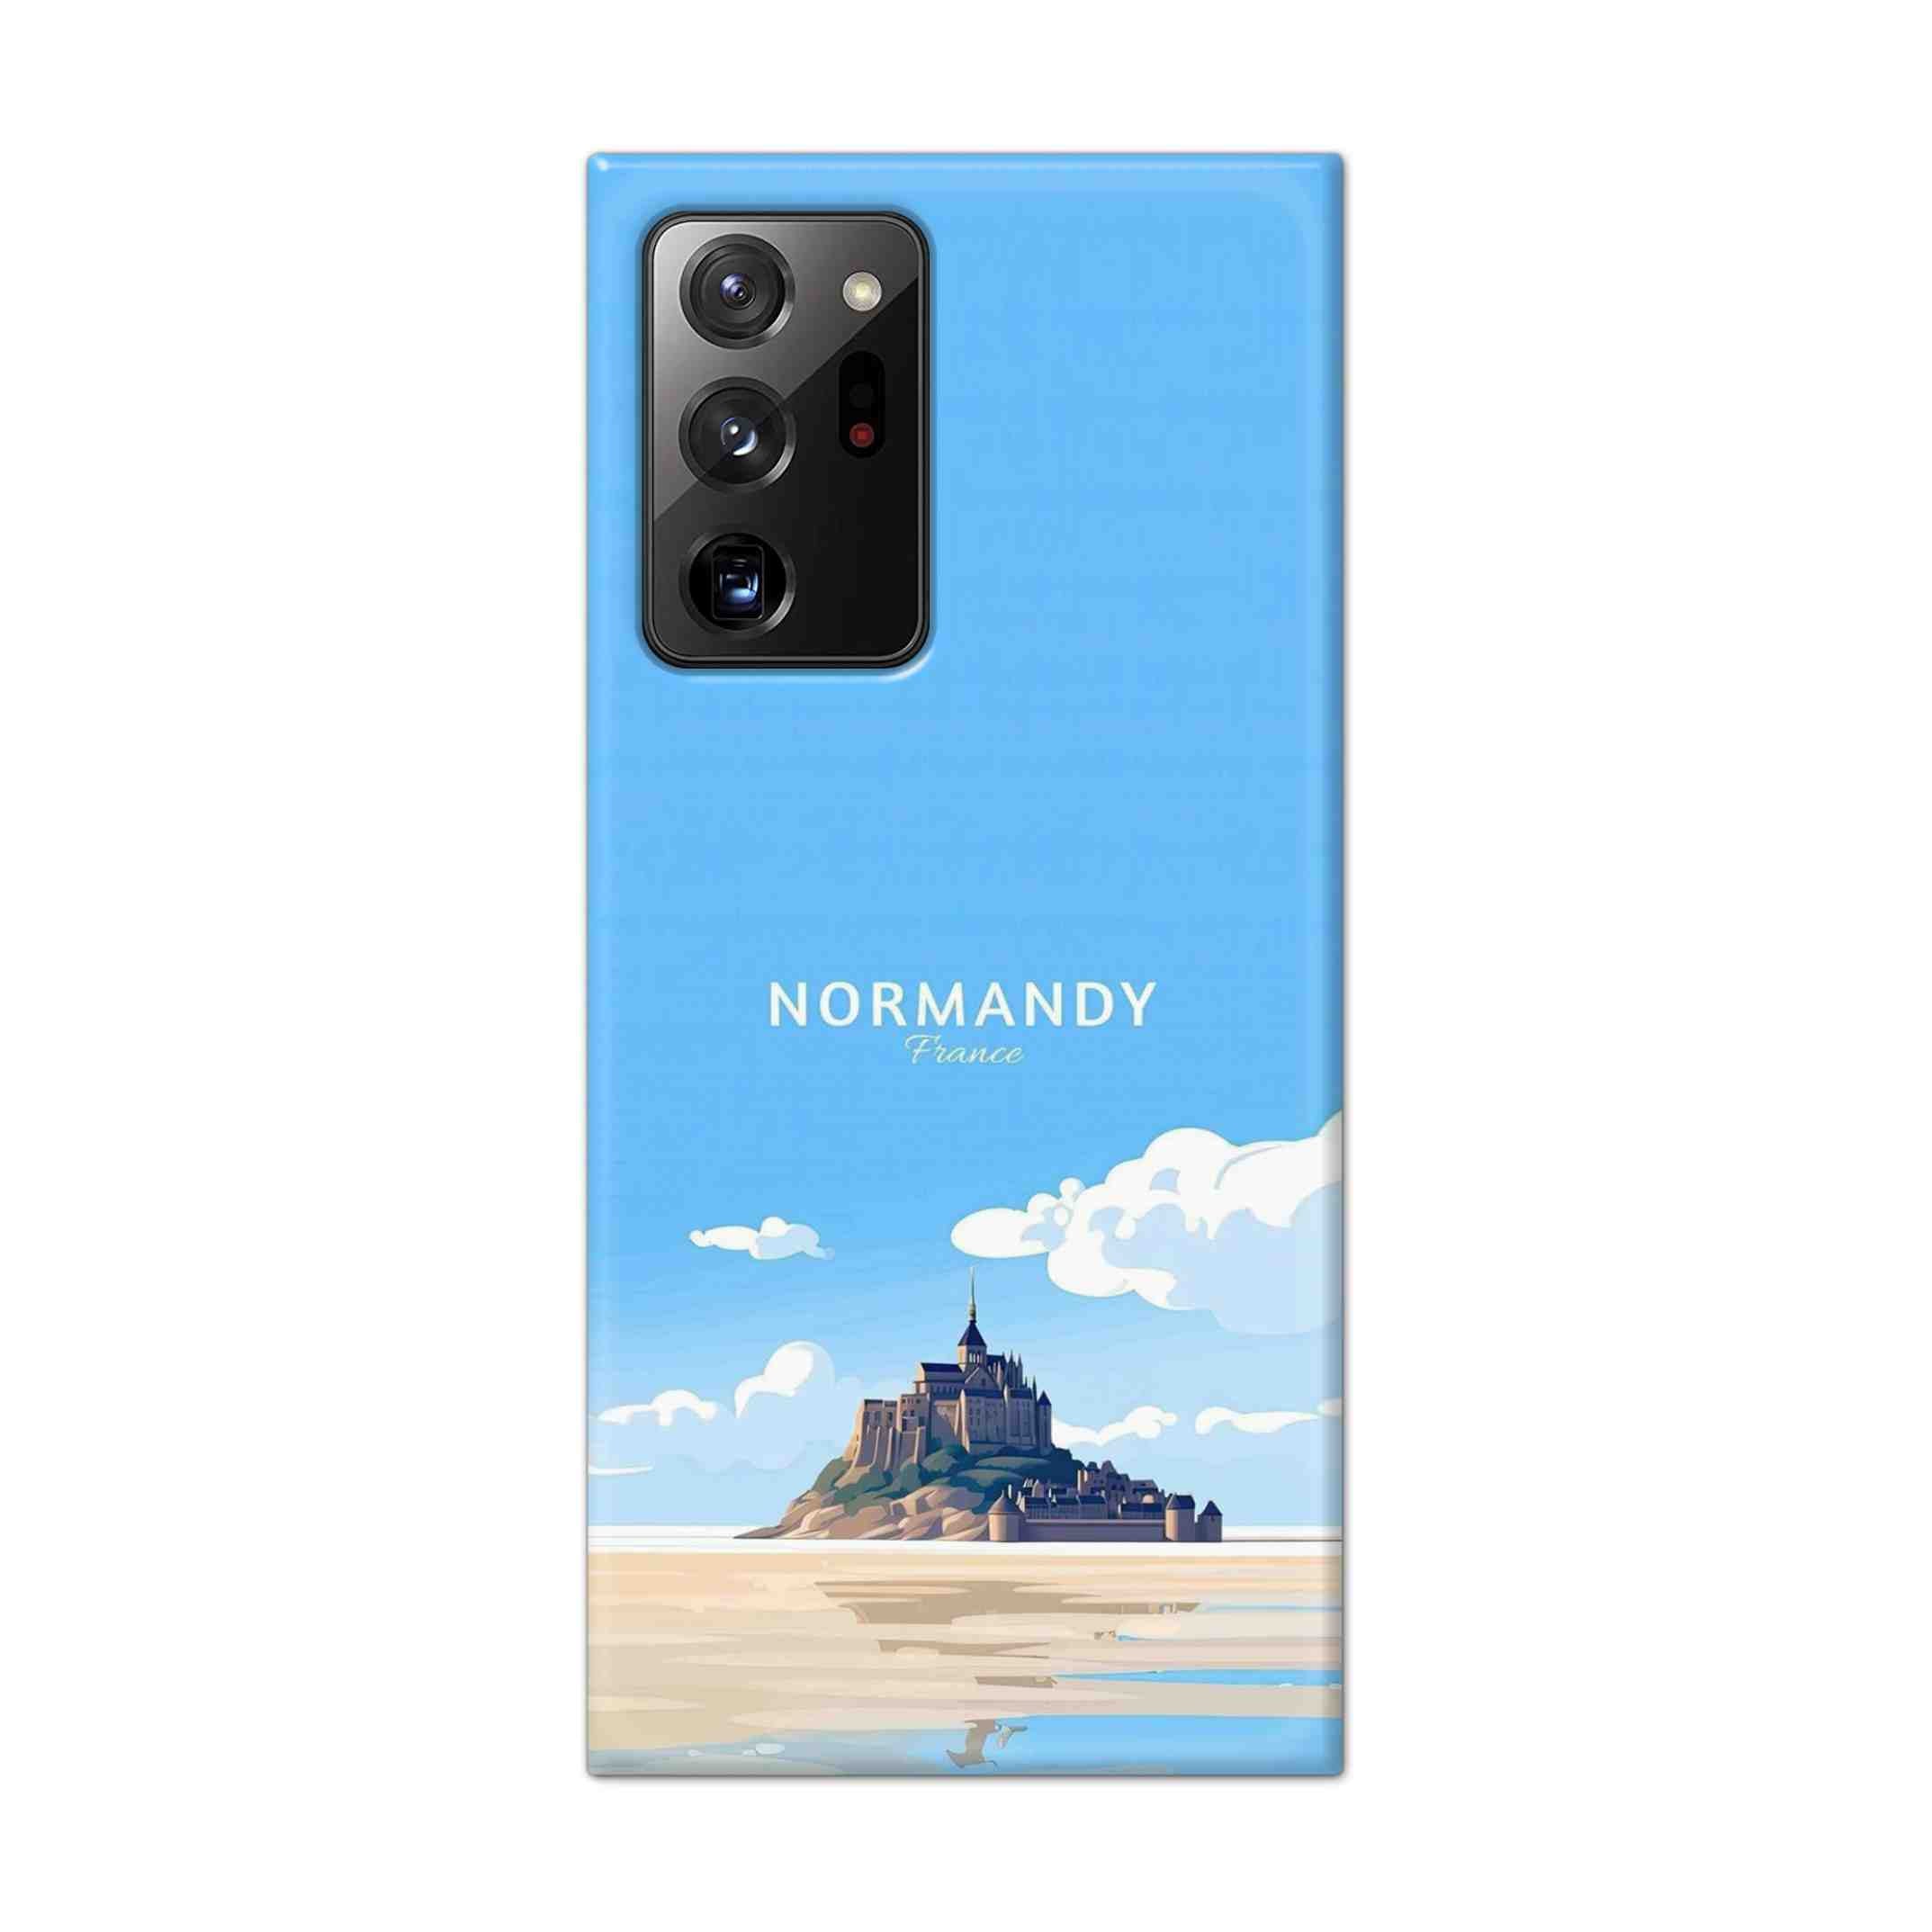 Buy Normandy Hard Back Mobile Phone Case Cover For Samsung Galaxy Note 20 Ultra Online